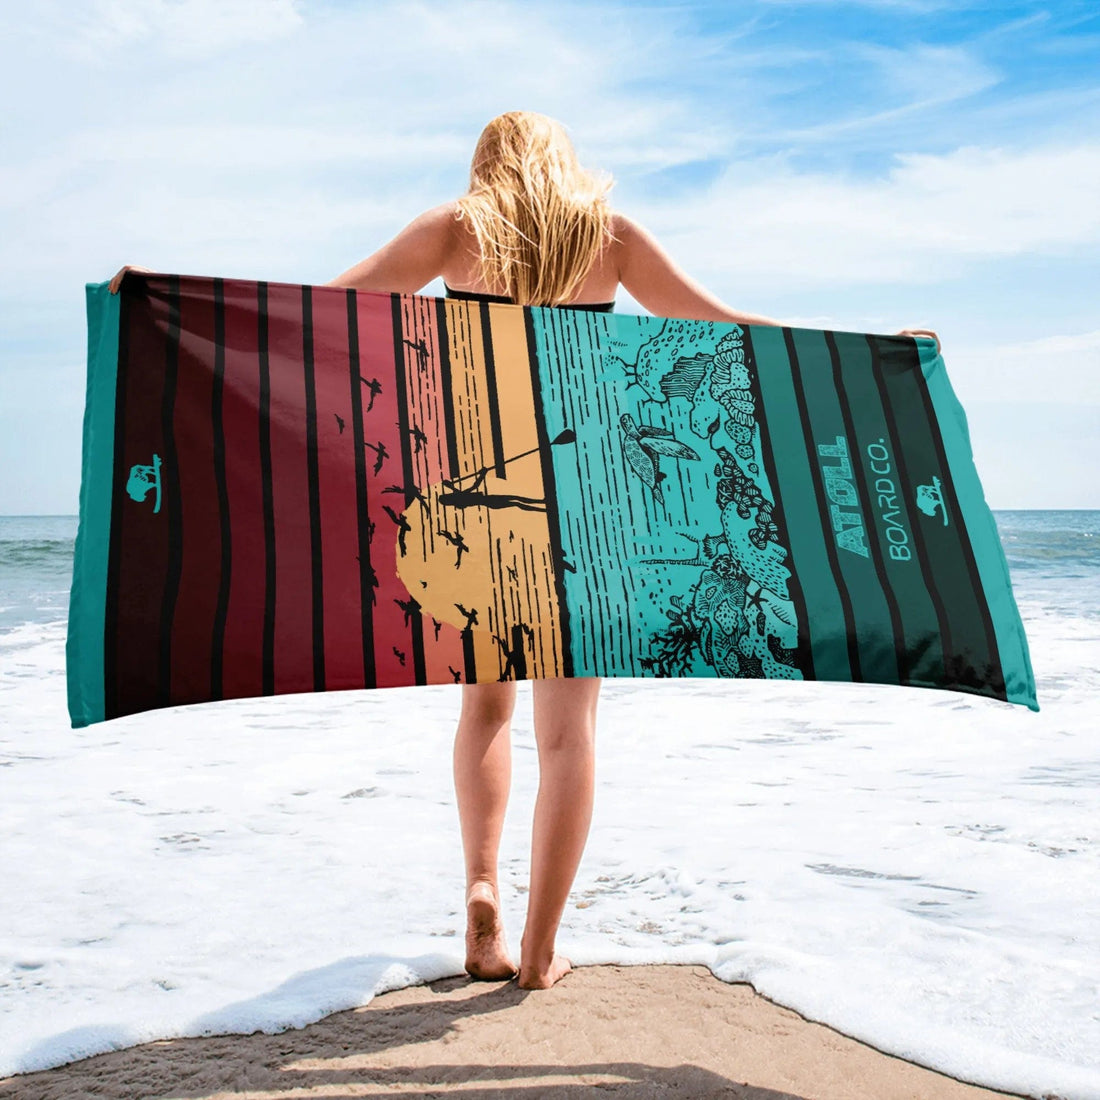 Atoll Atoll Board Co. Towel - Paddle Boarder and Reef